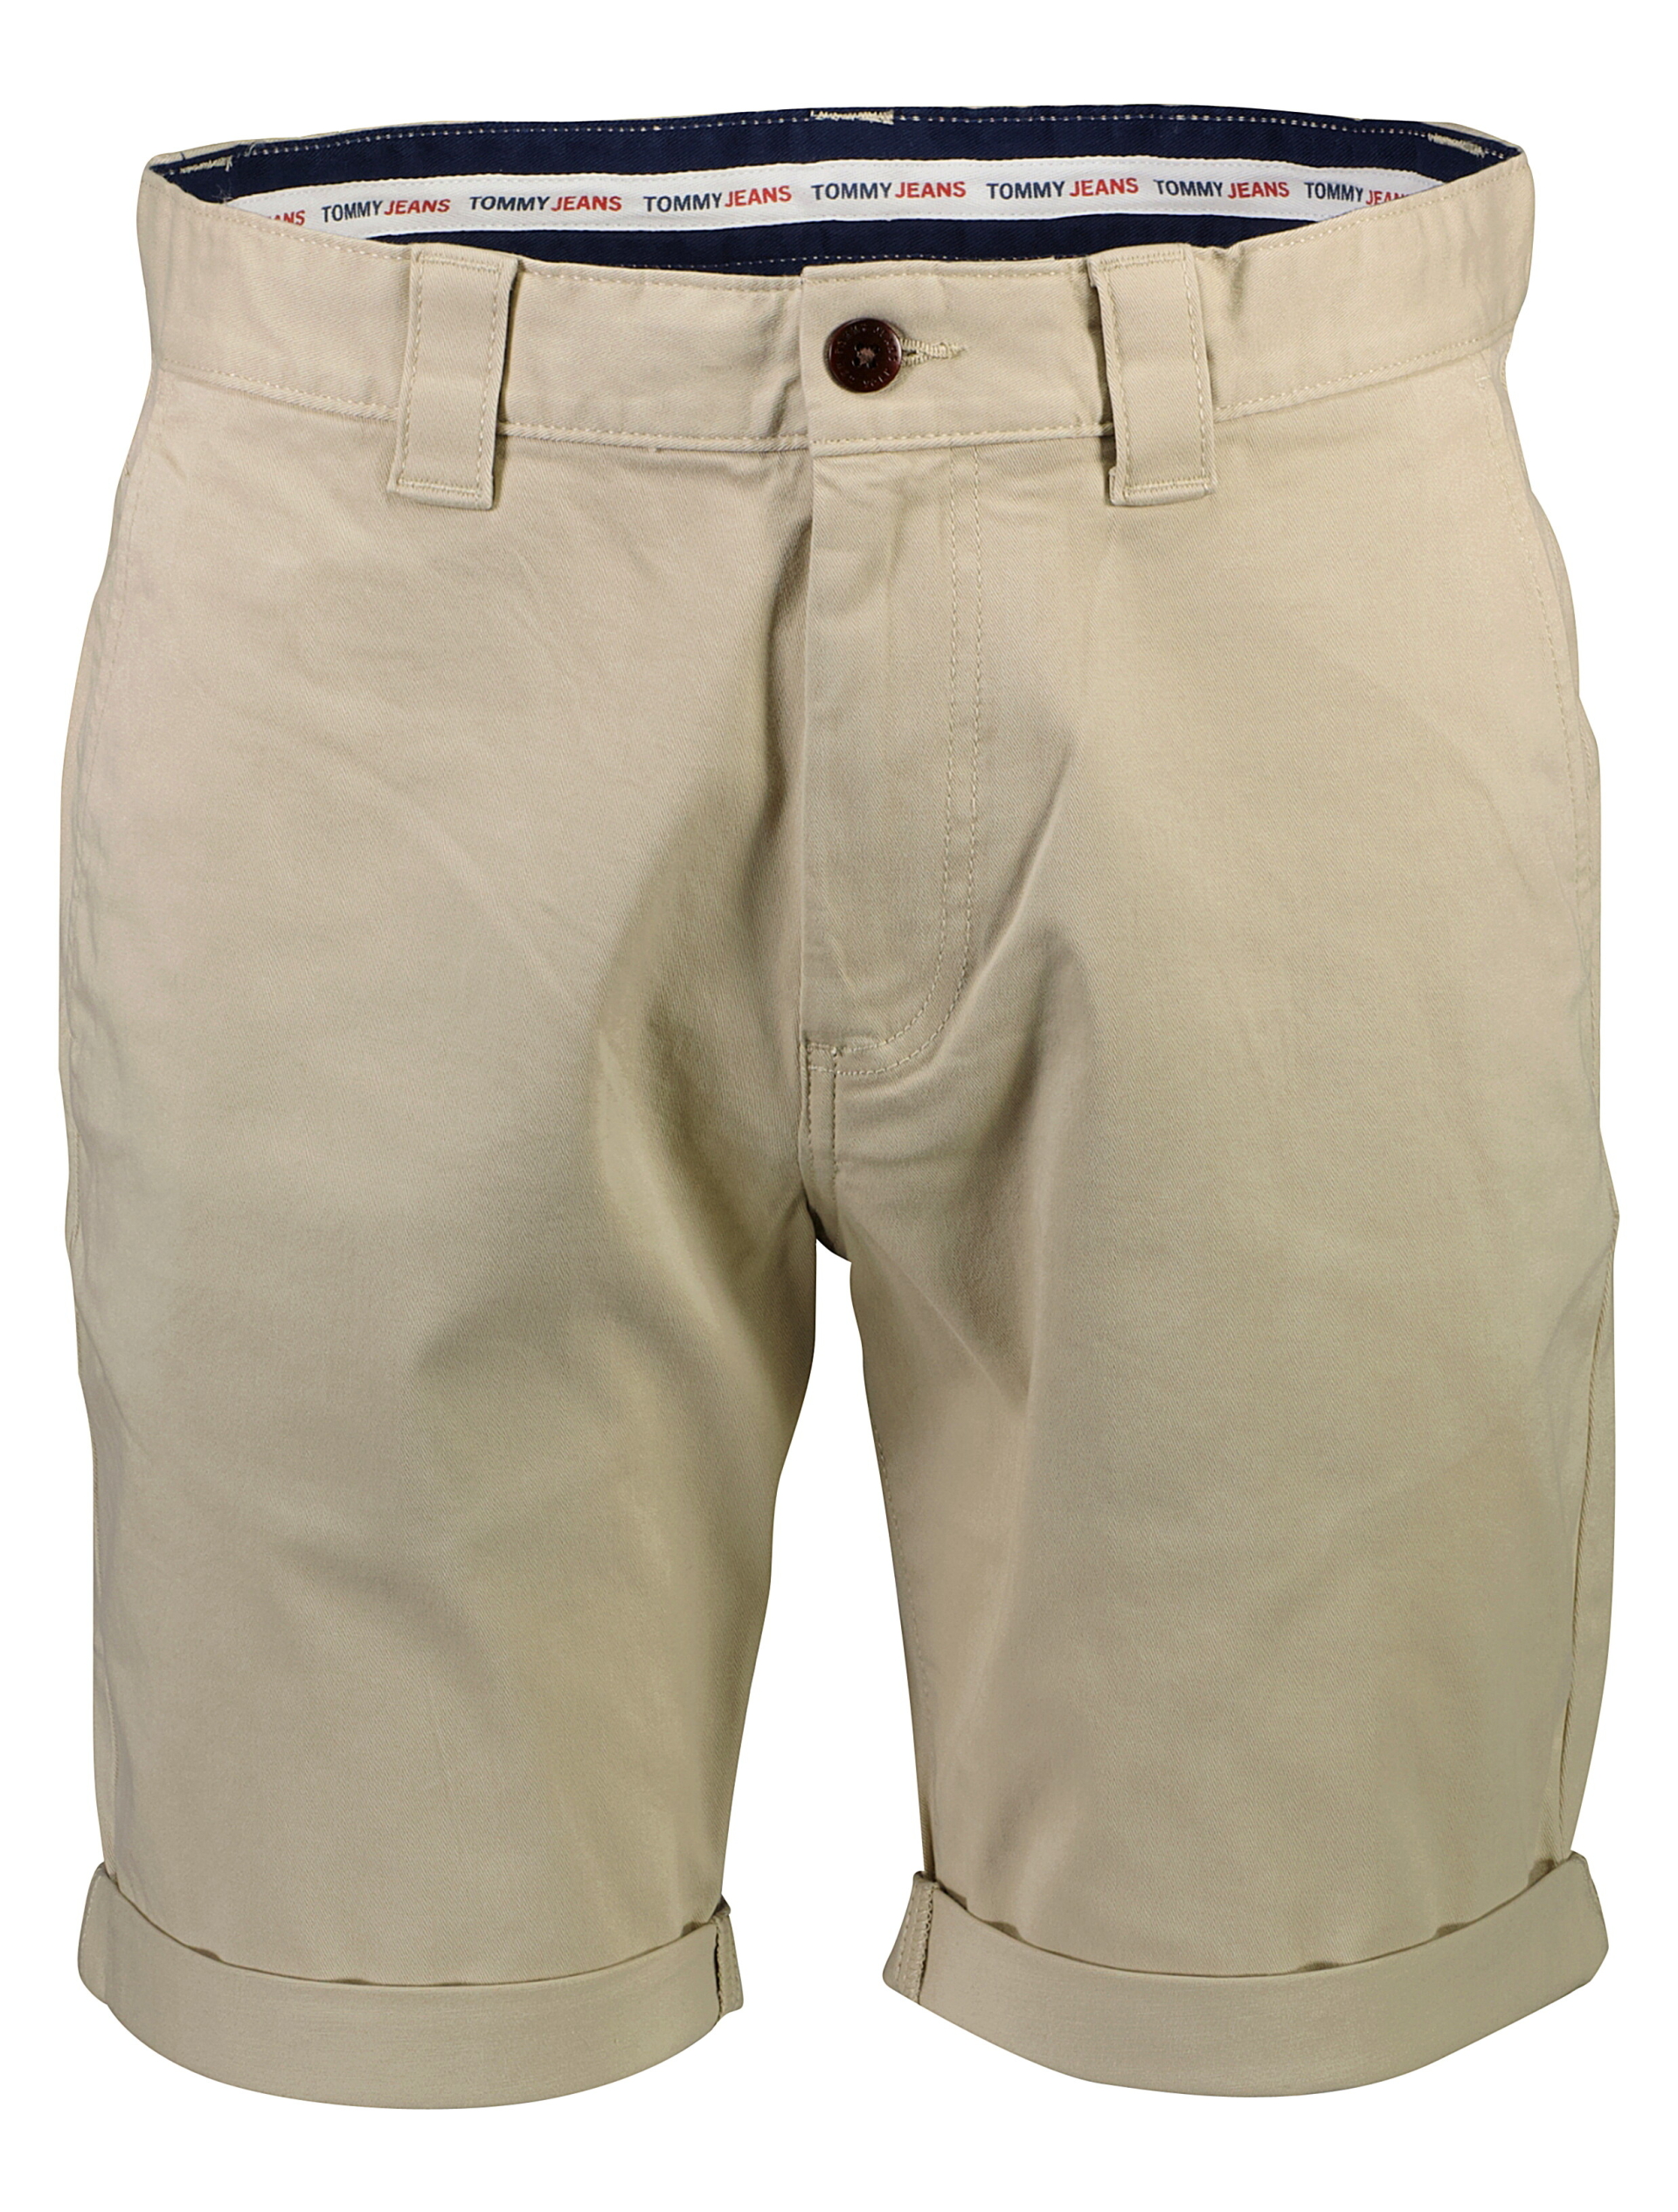 Tommy Jeans Chino shorts sand / acm sand